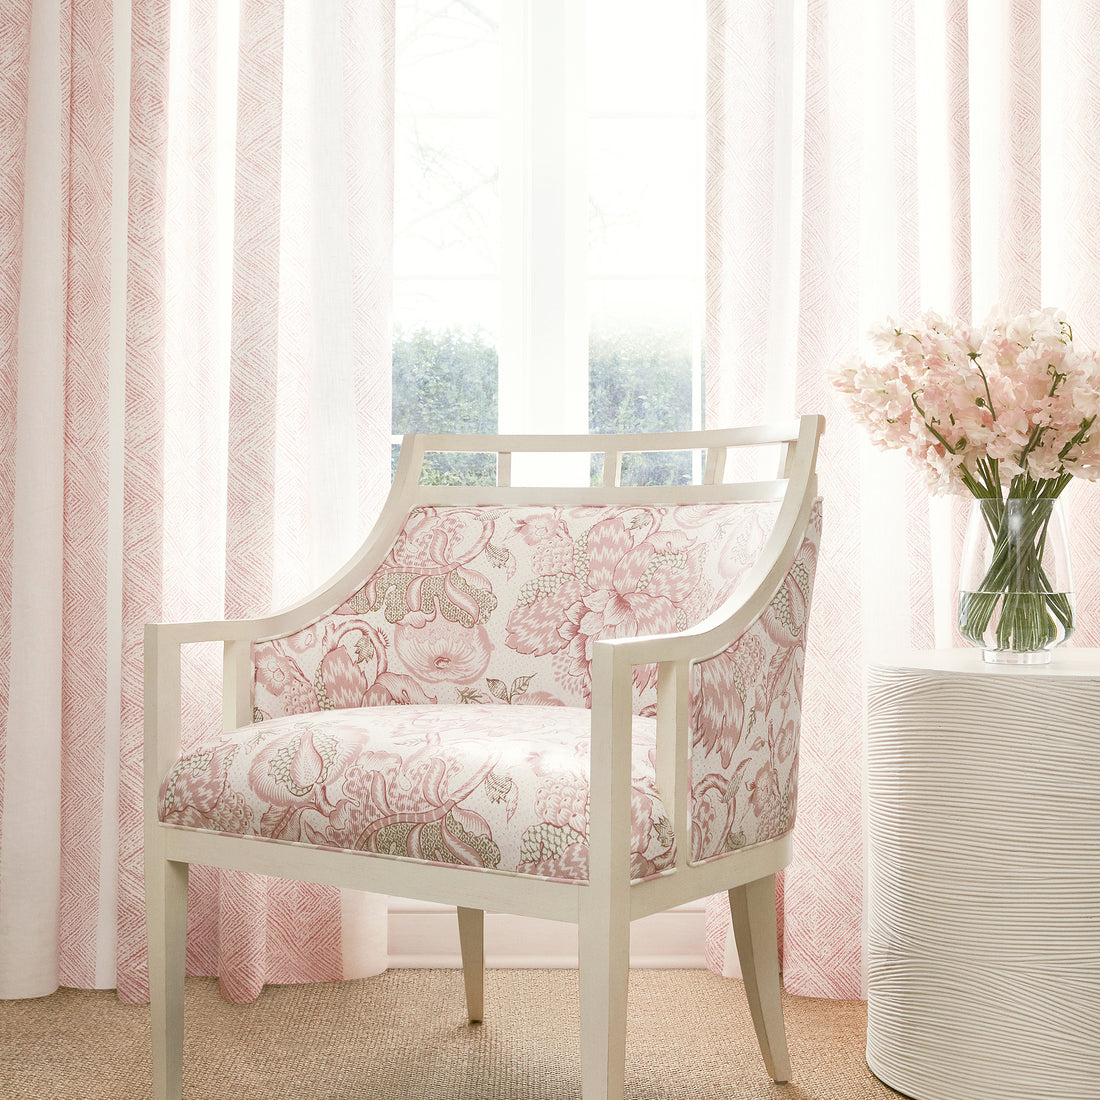 Malibu Chair in Westmont printed fabric in Blush - pattern number AF15107 - by Anna French in the Antilles collection